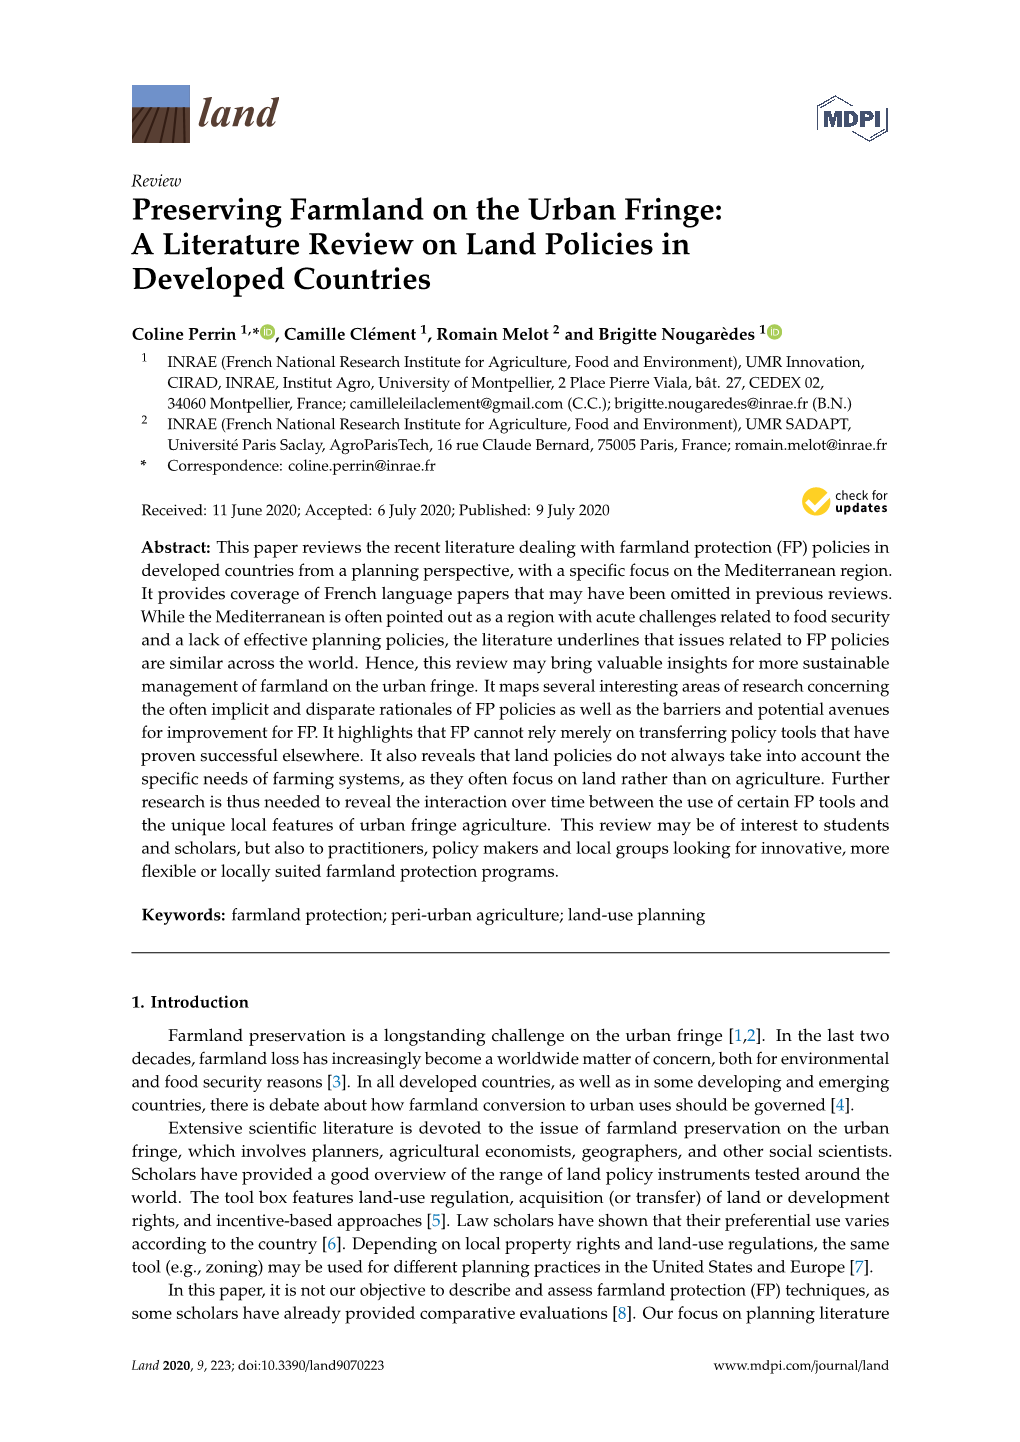 Preserving Farmland on the Urban Fringe: a Literature Review on Land Policies in Developed Countries